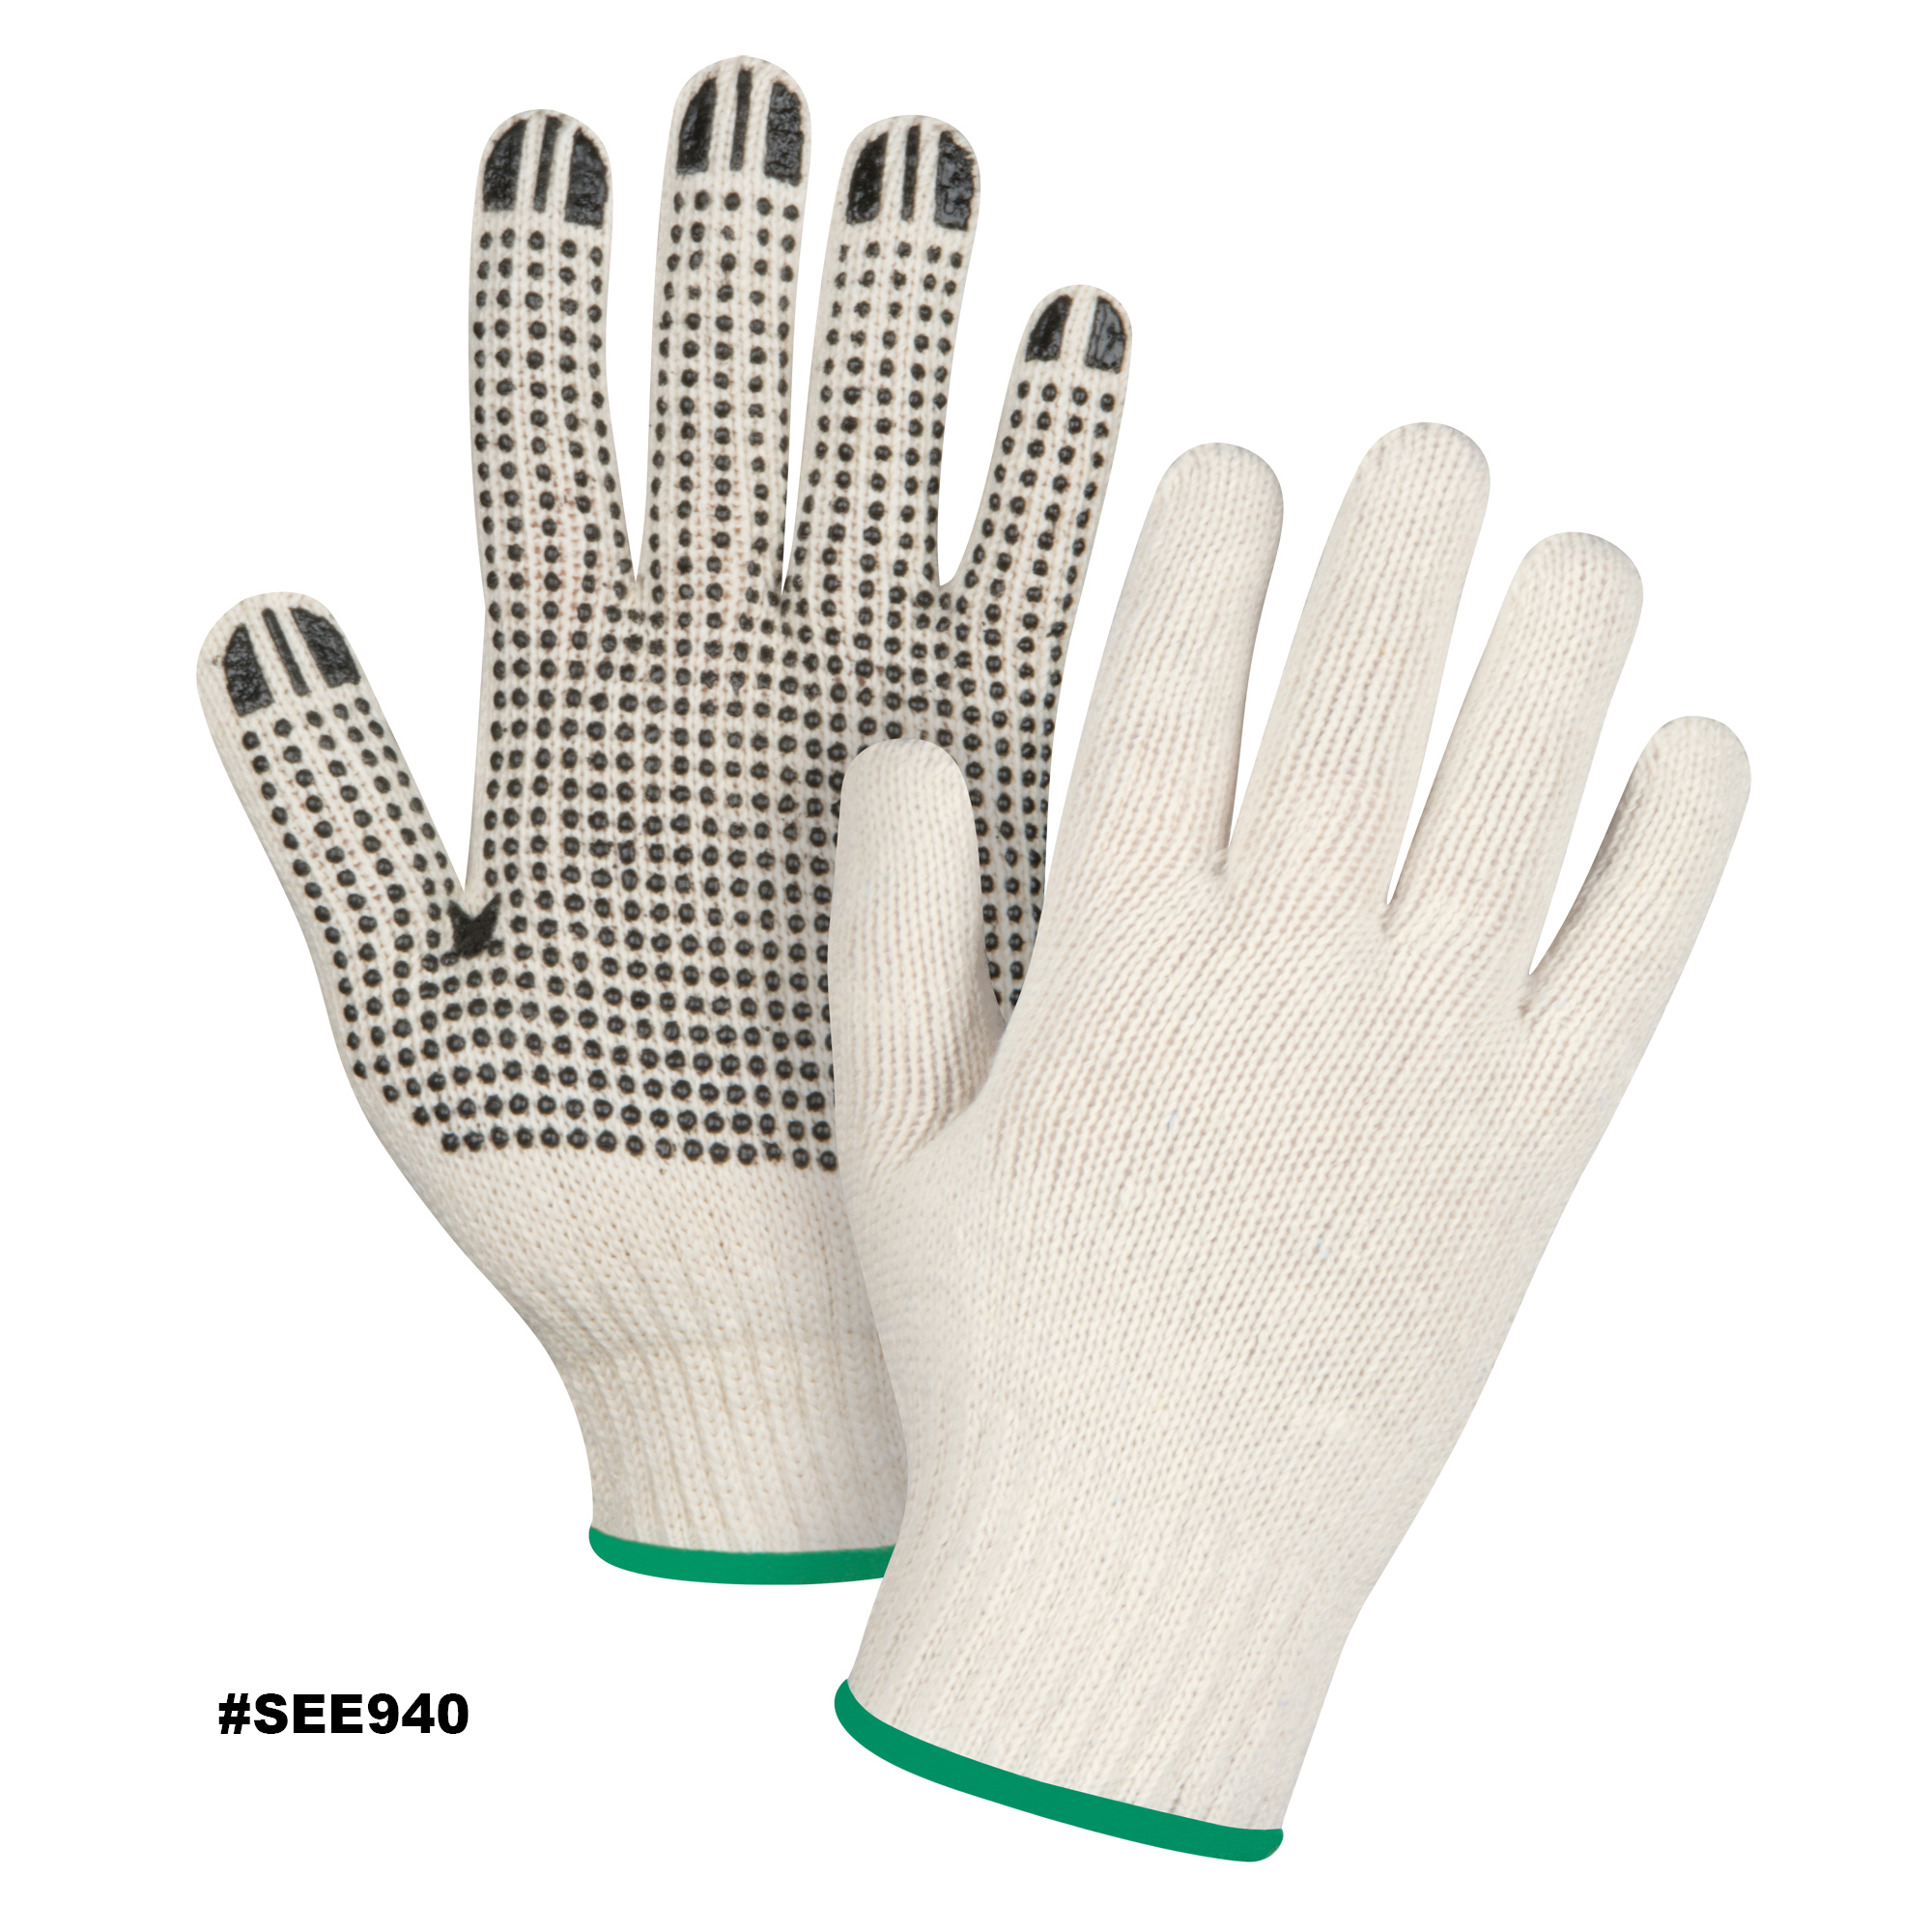 Zenith Dotted Gloves, Poly/Cotton, Single Sided, 7 -Guage, Medium Model: SEE940